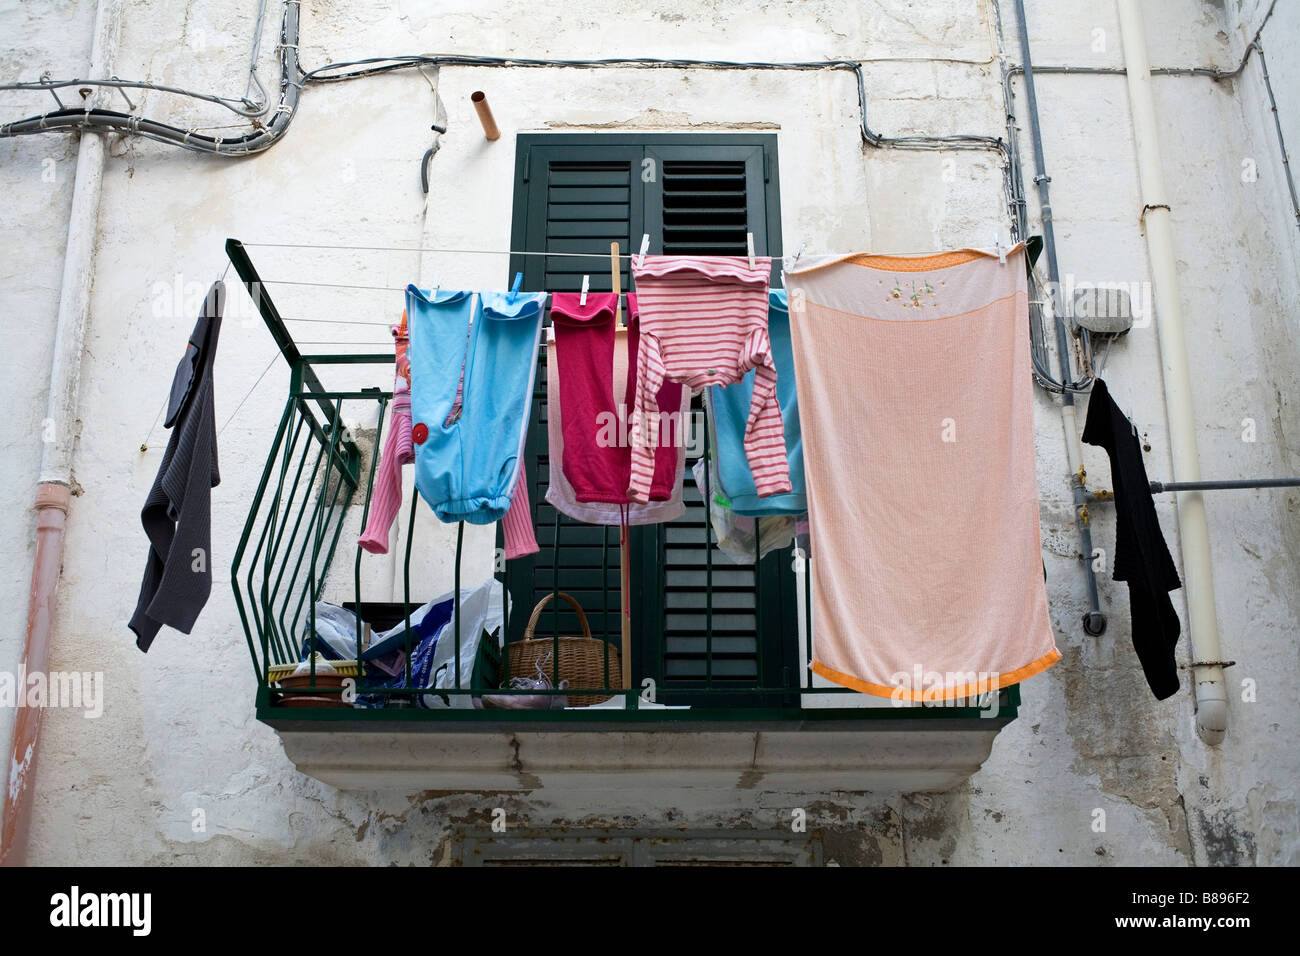 Washing hanging outside in Monopoli Old Town, southern Italy. Stock Photo